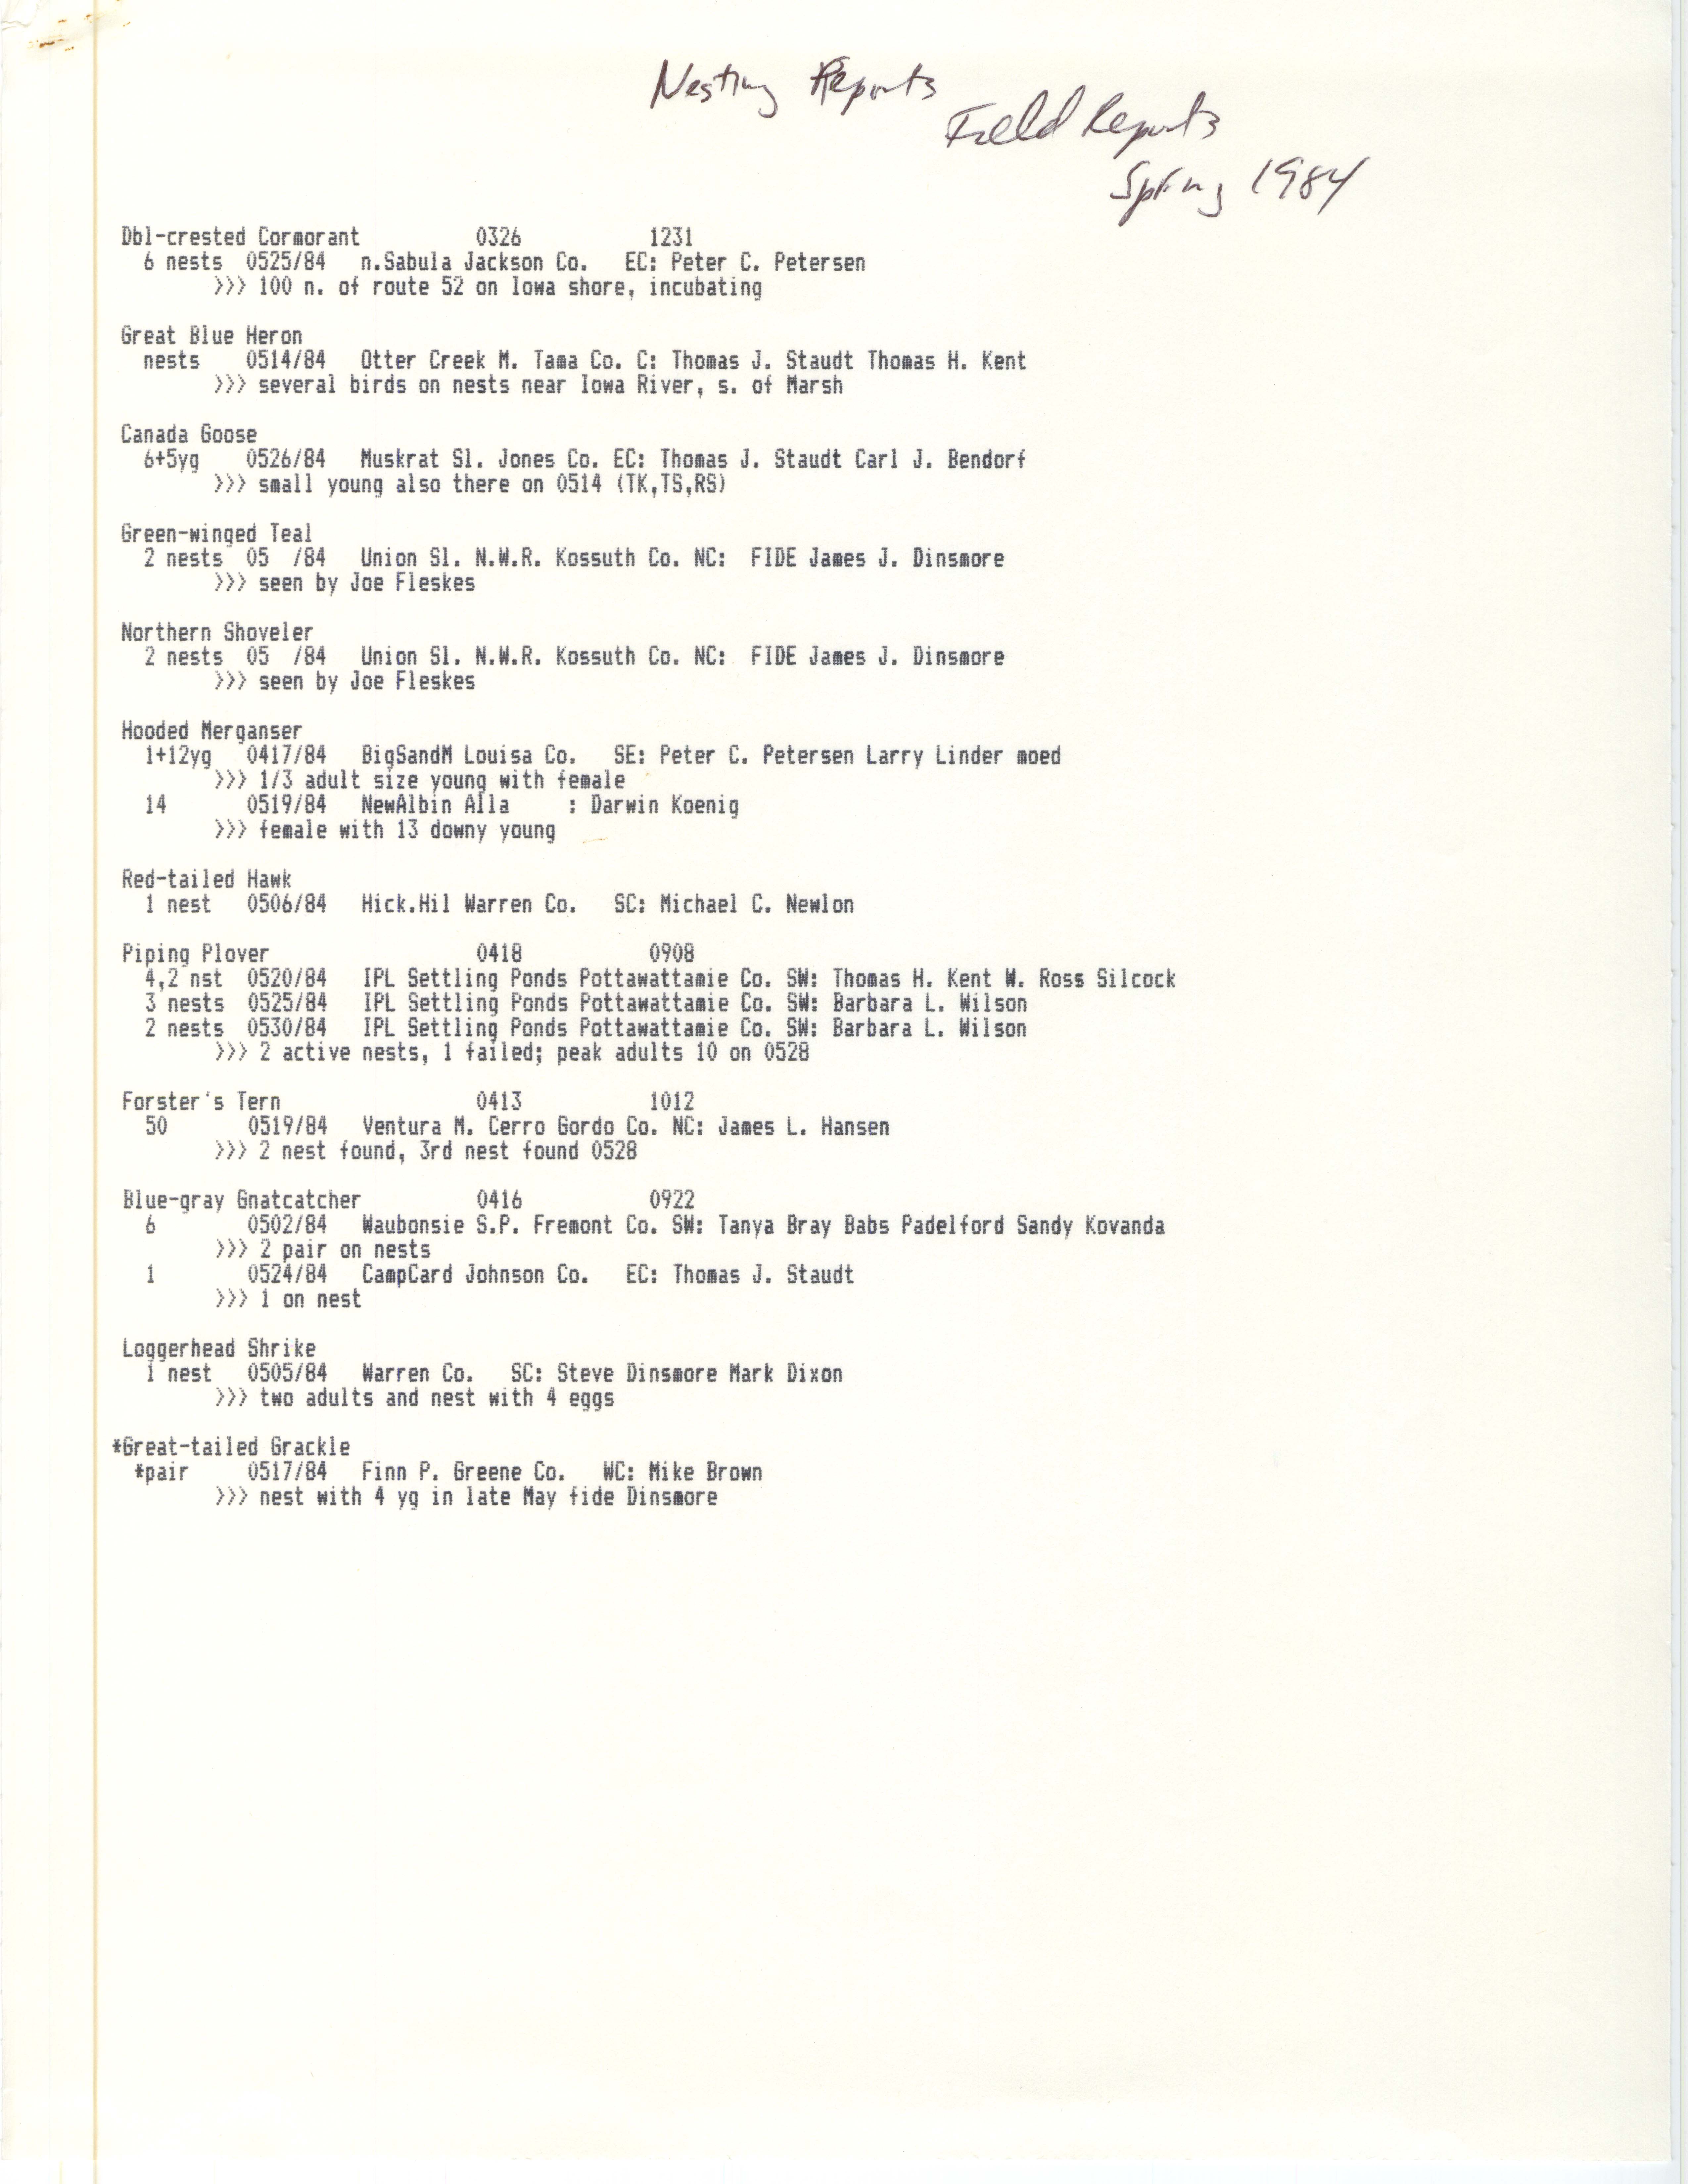 Nesting reports, field reports, spring 1984